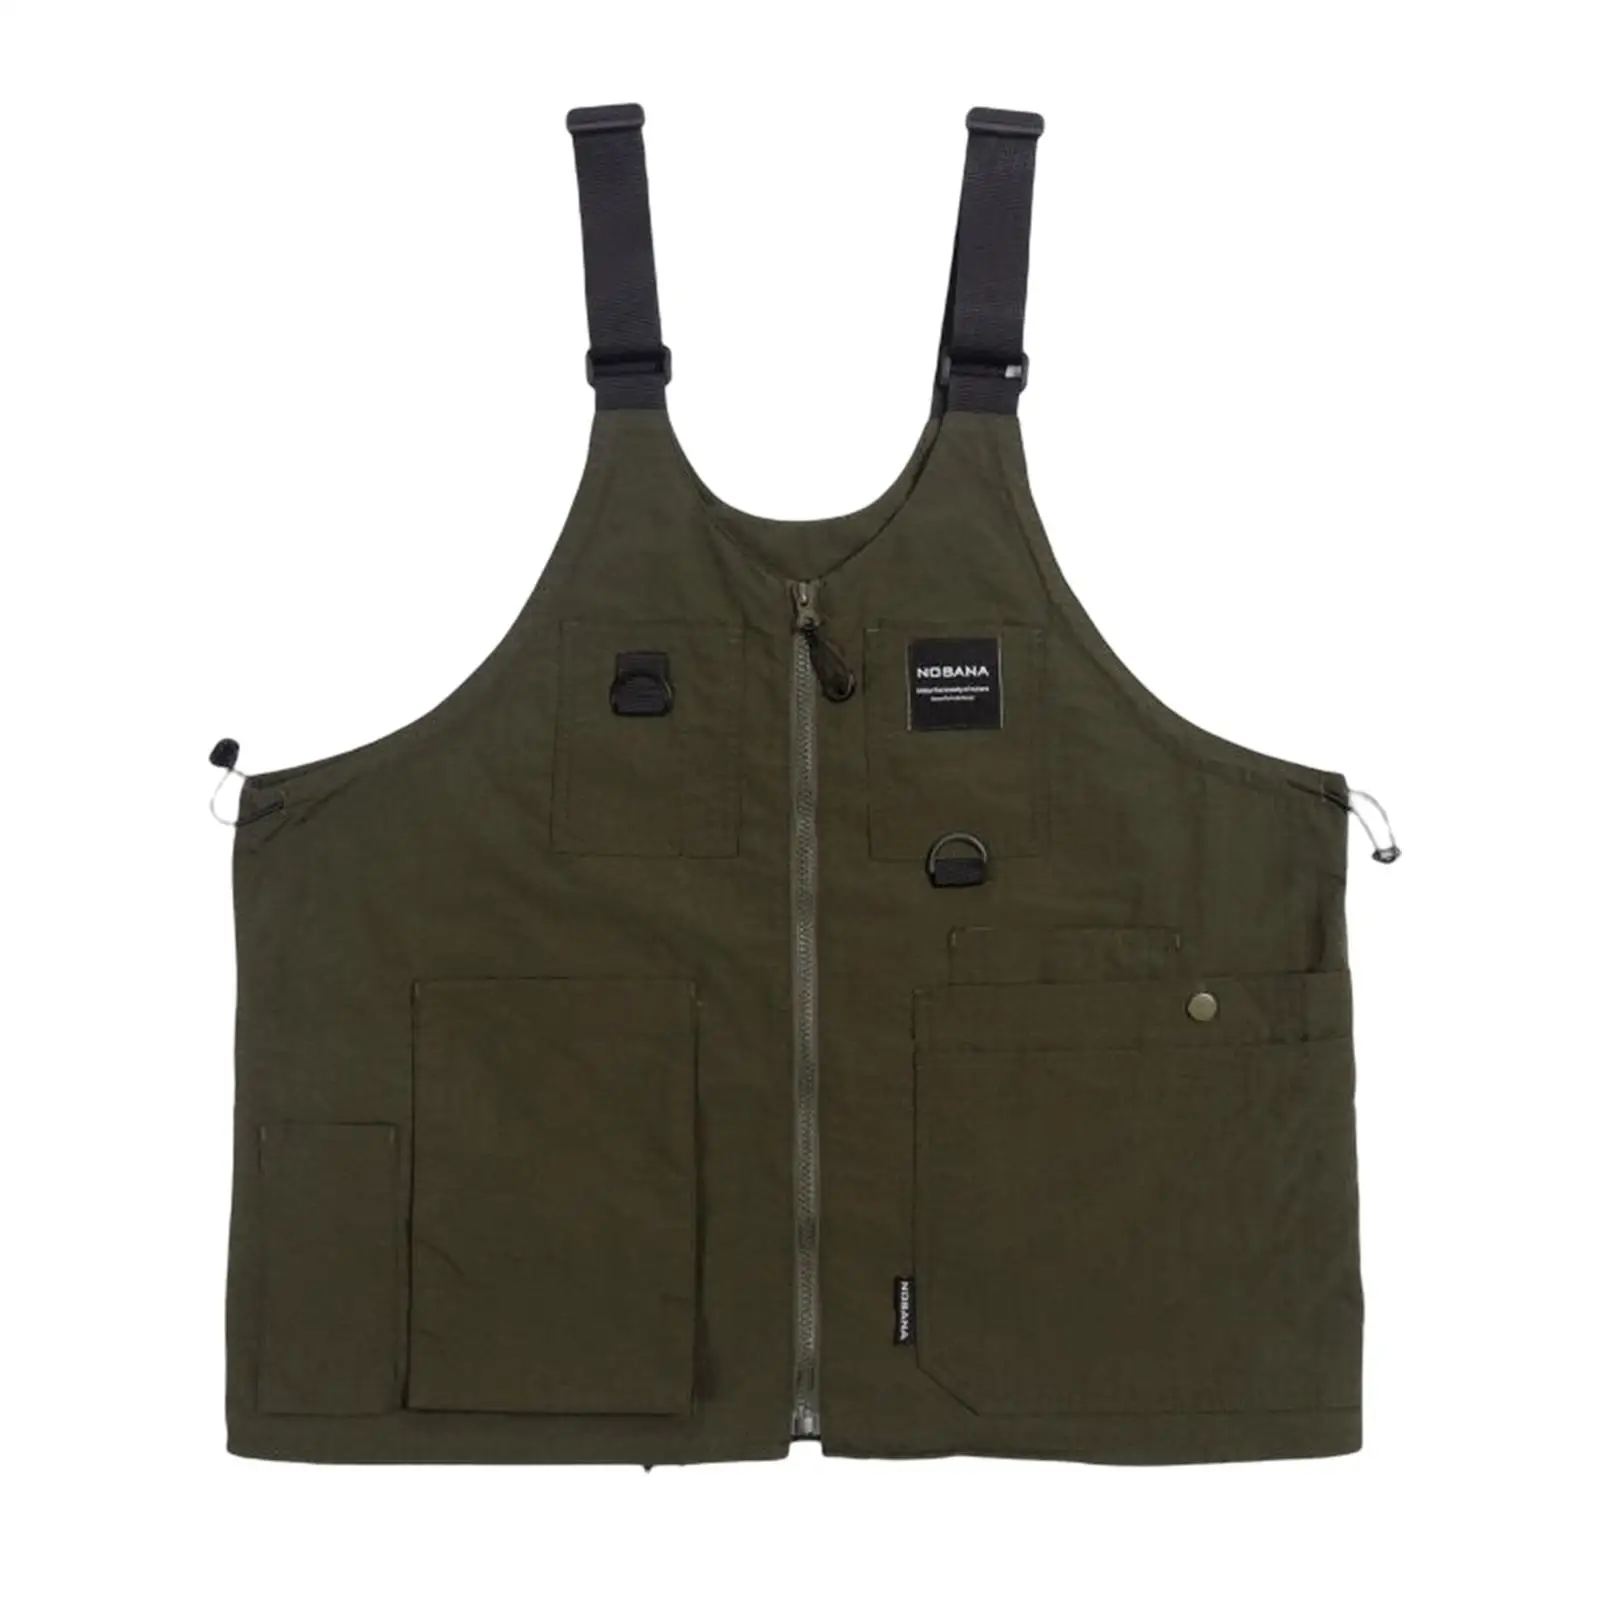 Outdoor Multi Functional Camping Vest Tote Casual Lightweight Multi Pocket Jacket Waistcoat for Fishing Hiking Men Women Adult